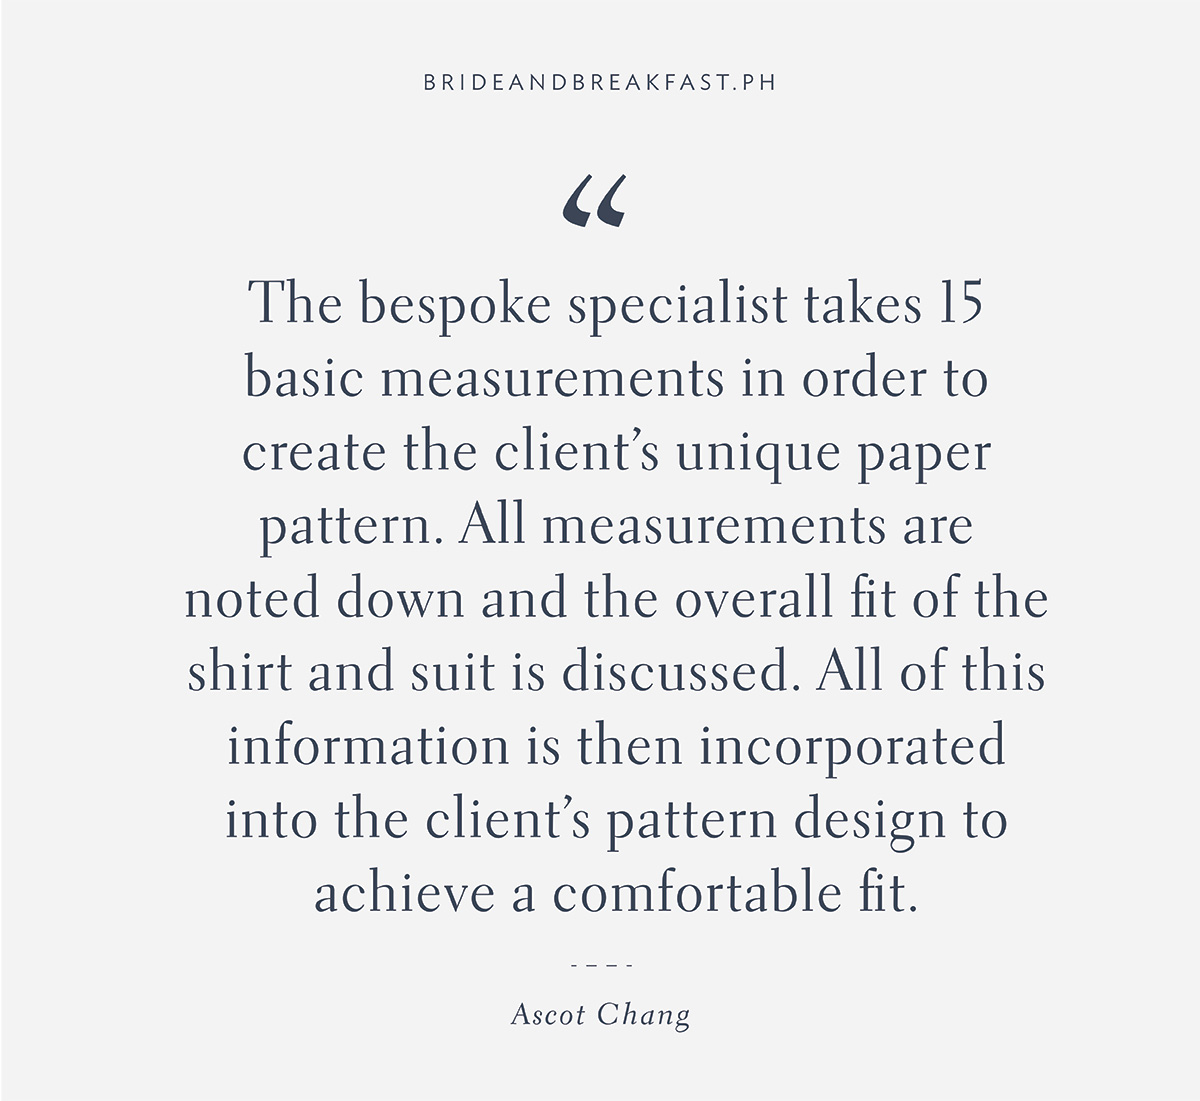 "The bespoke specialist takes 15 basic measurements in order to create the client’s unique paper pattern. All measurements are noted down and the overall fit of the shirt and suit is discussed. All of this information is then incorporated into the client’s pattern design to achieve a comfortable fit.”